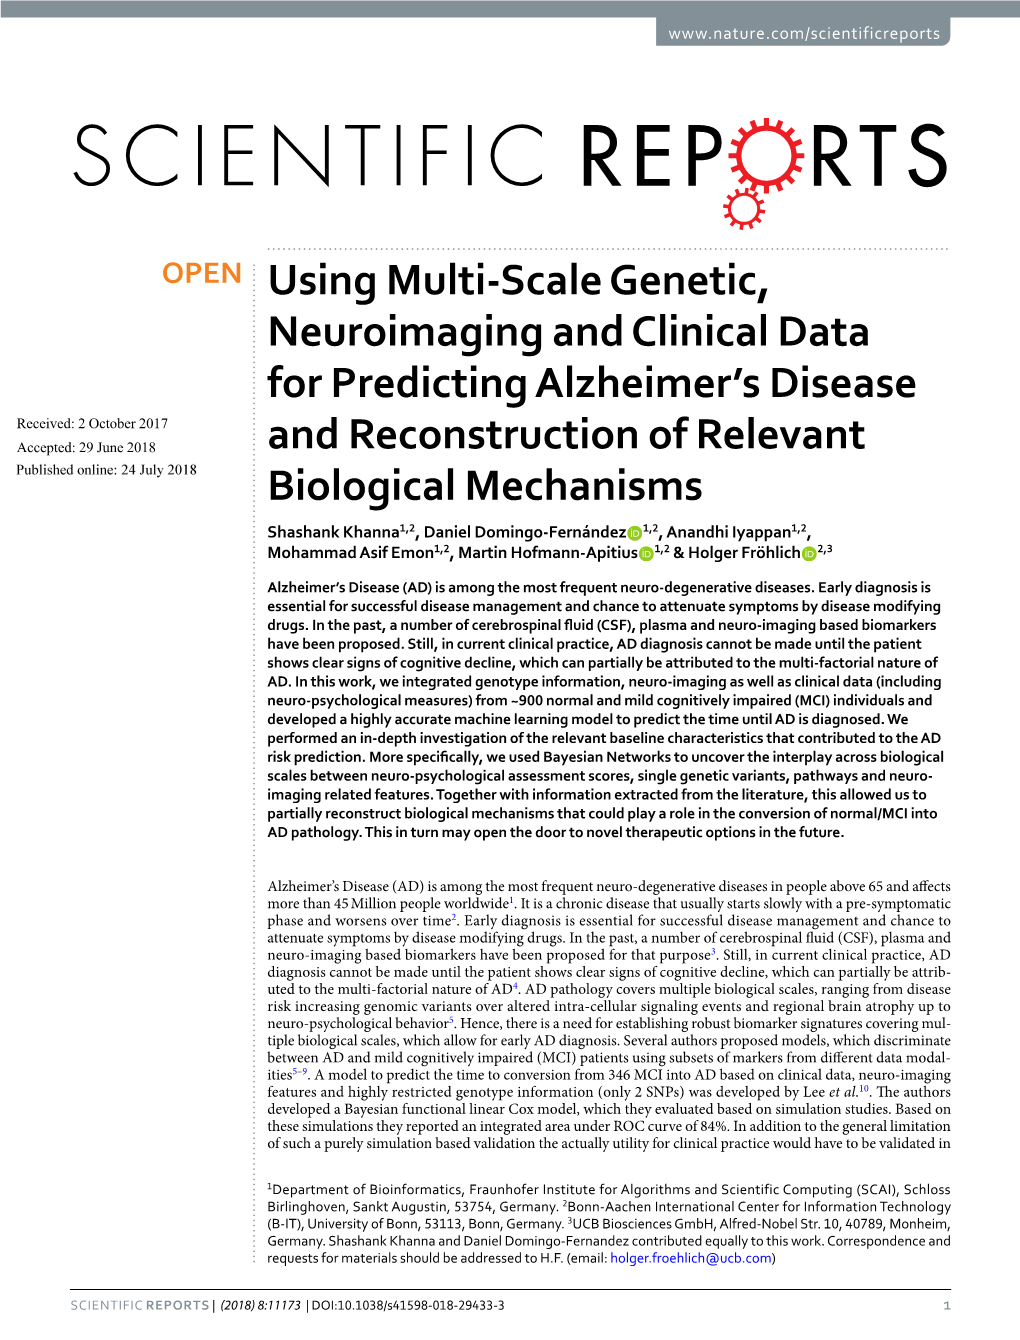 Using Multi-Scale Genetic, Neuroimaging and Clinical Data For